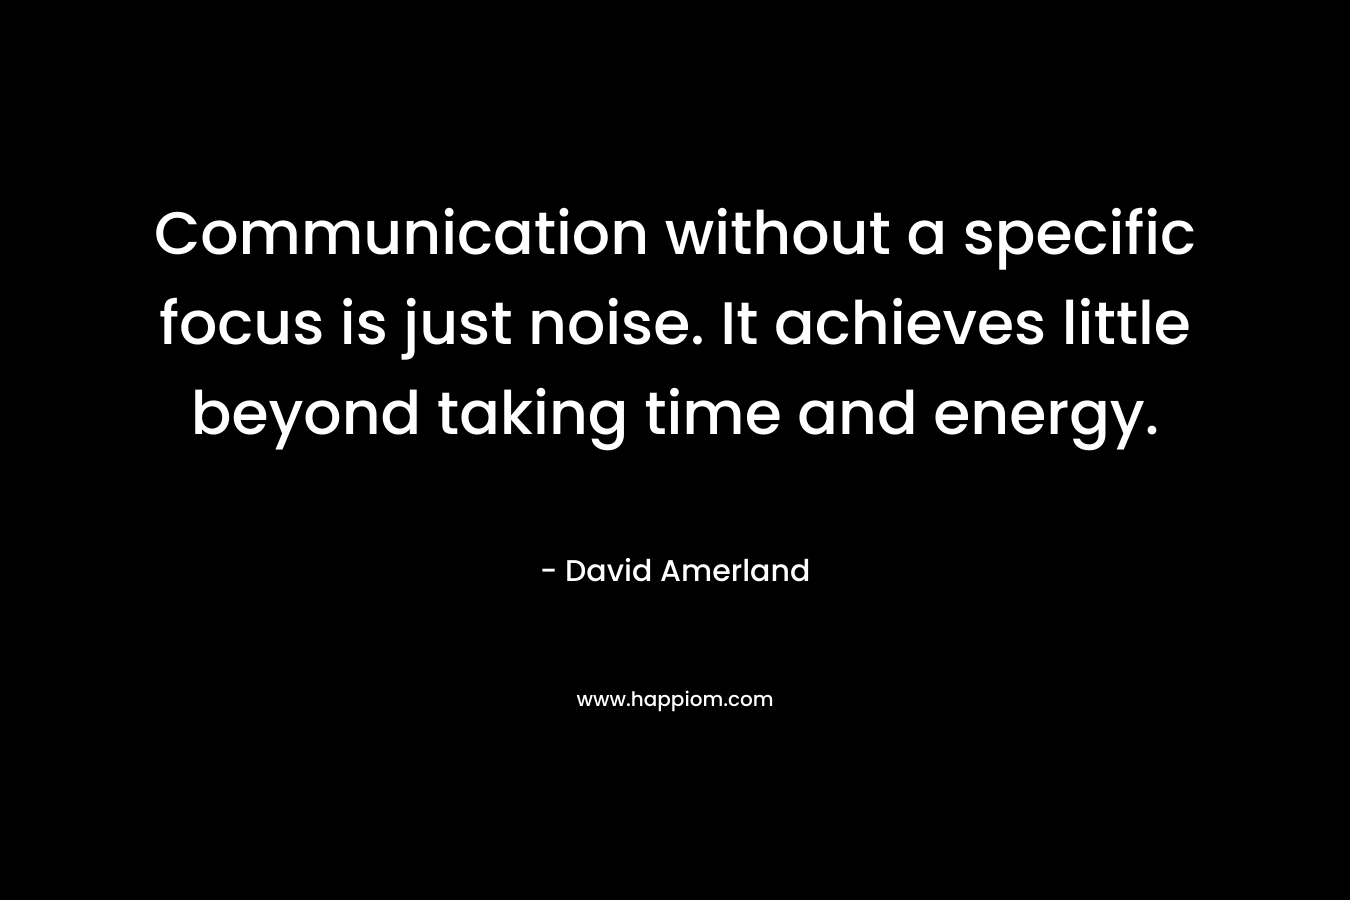 Communication without a specific focus is just noise. It achieves little beyond taking time and energy. – David Amerland